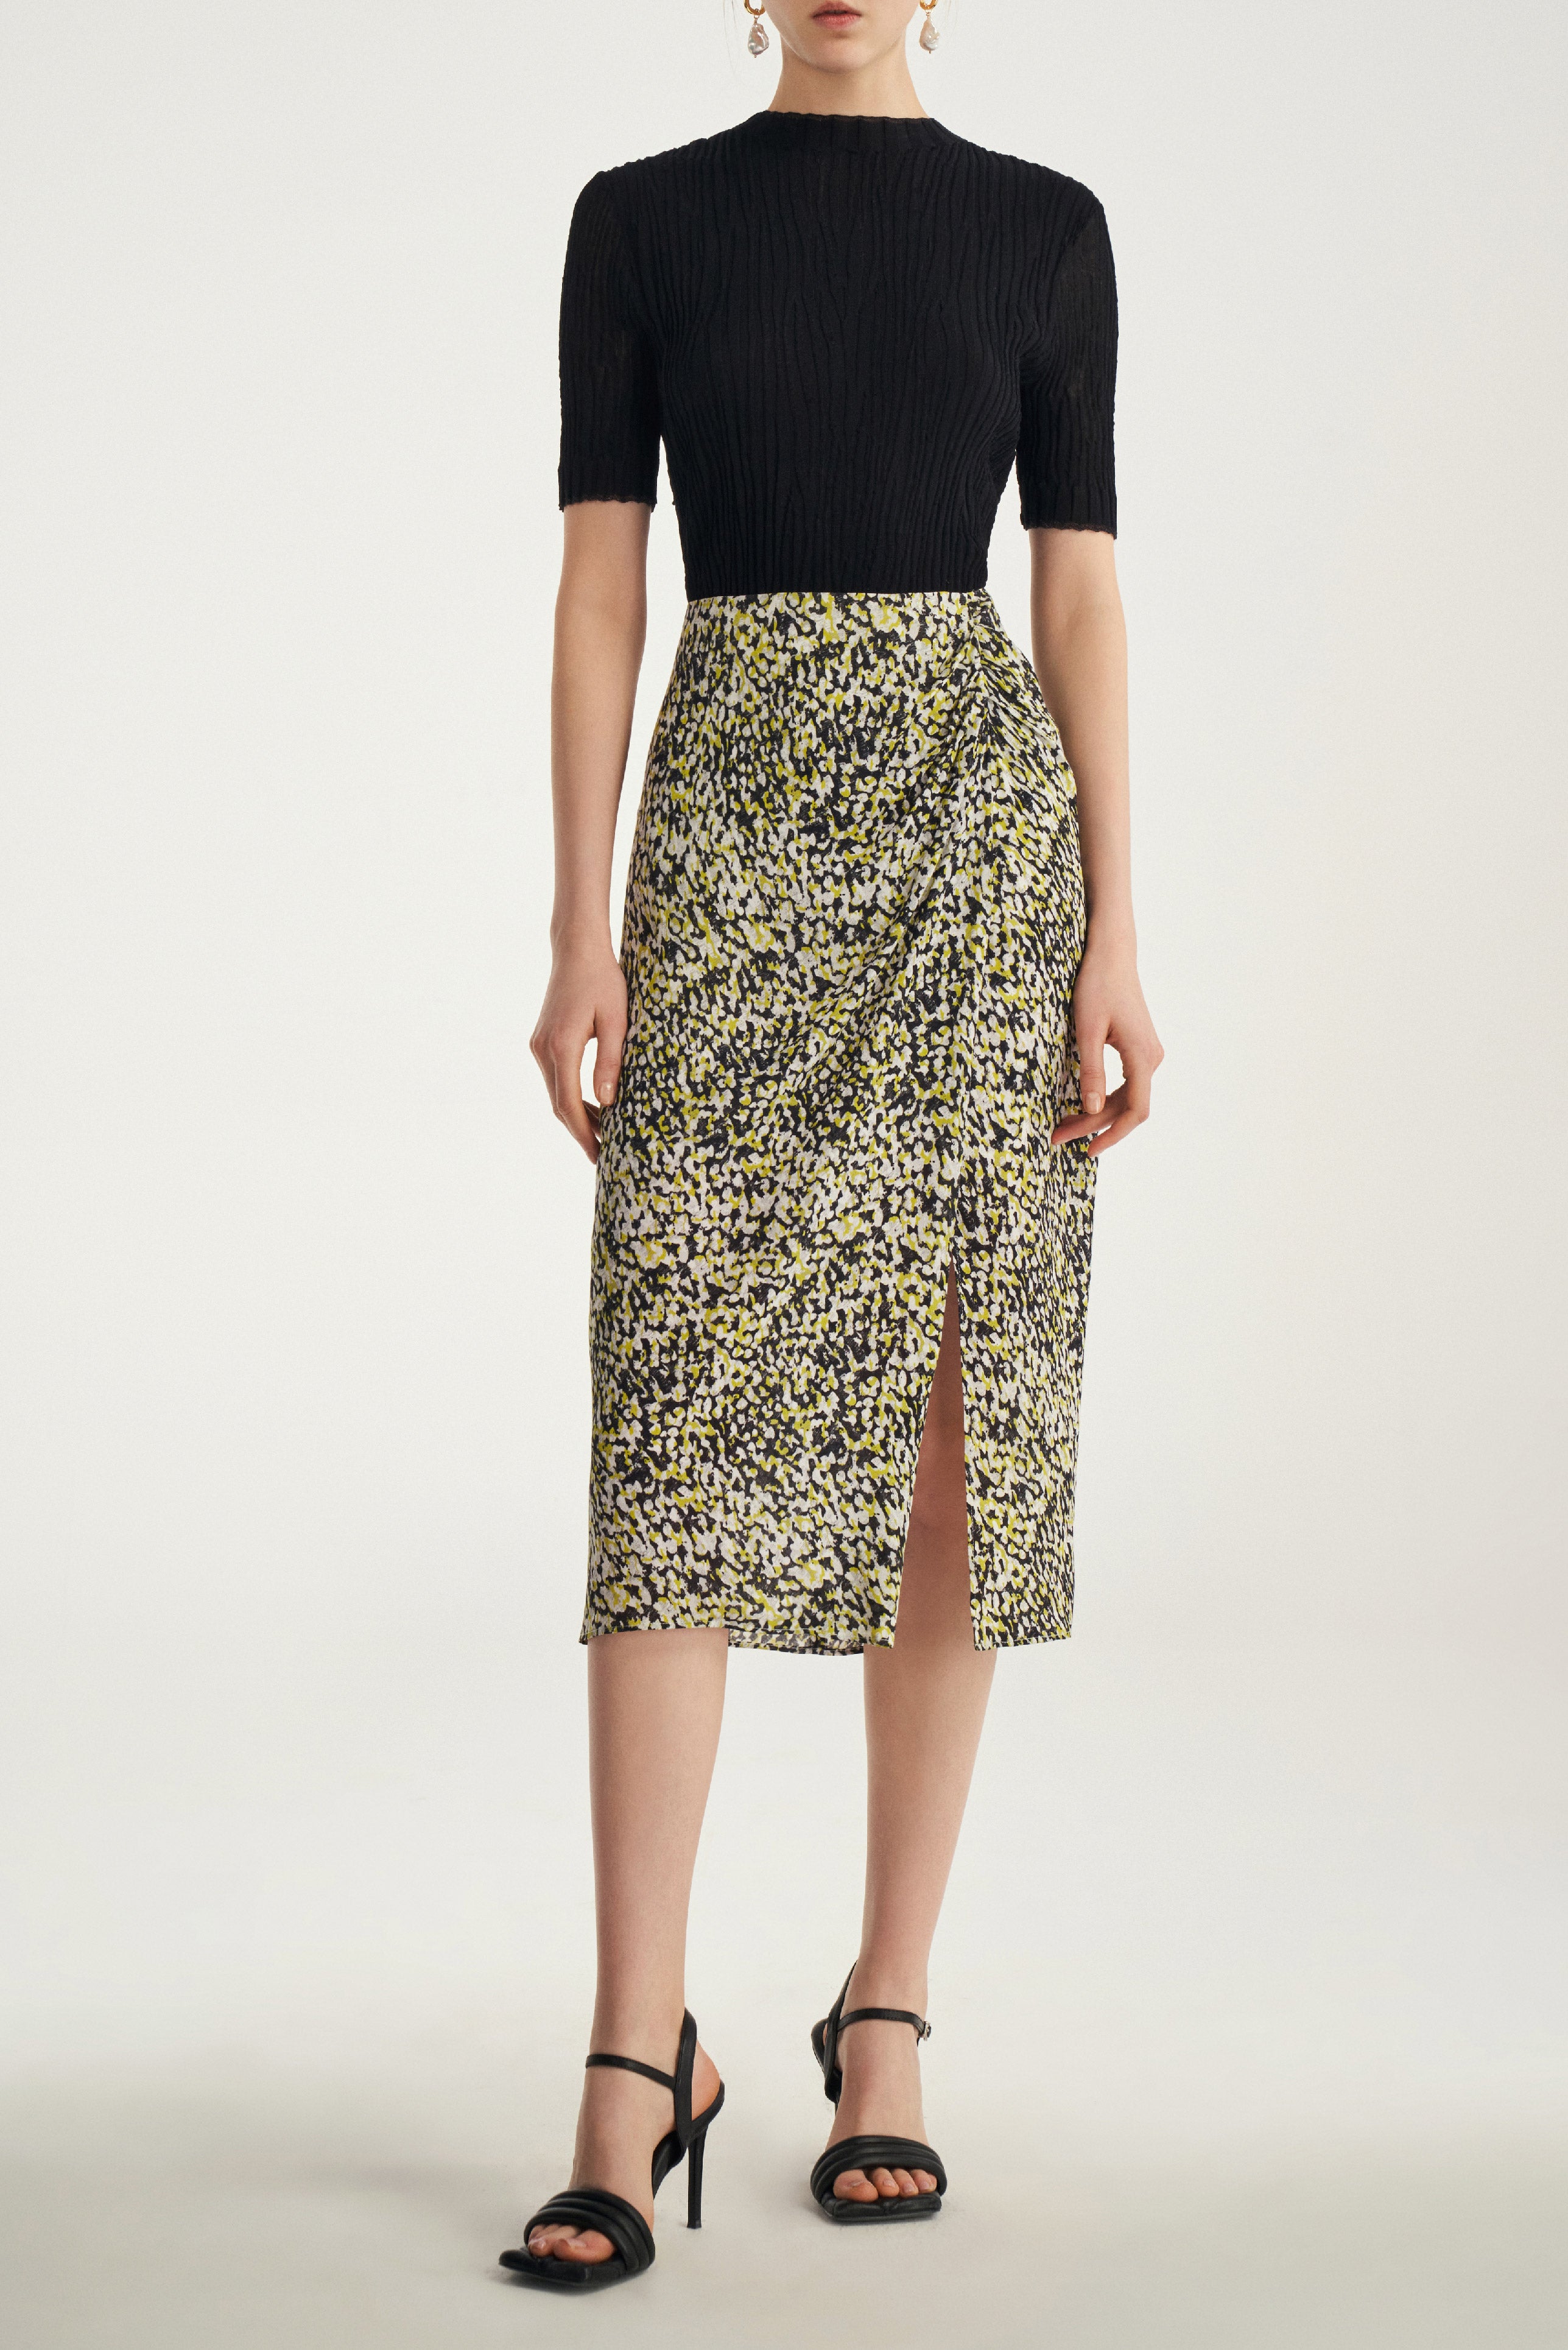 Laurèl Optical Illusion Art Print Skirt With Gather Detail